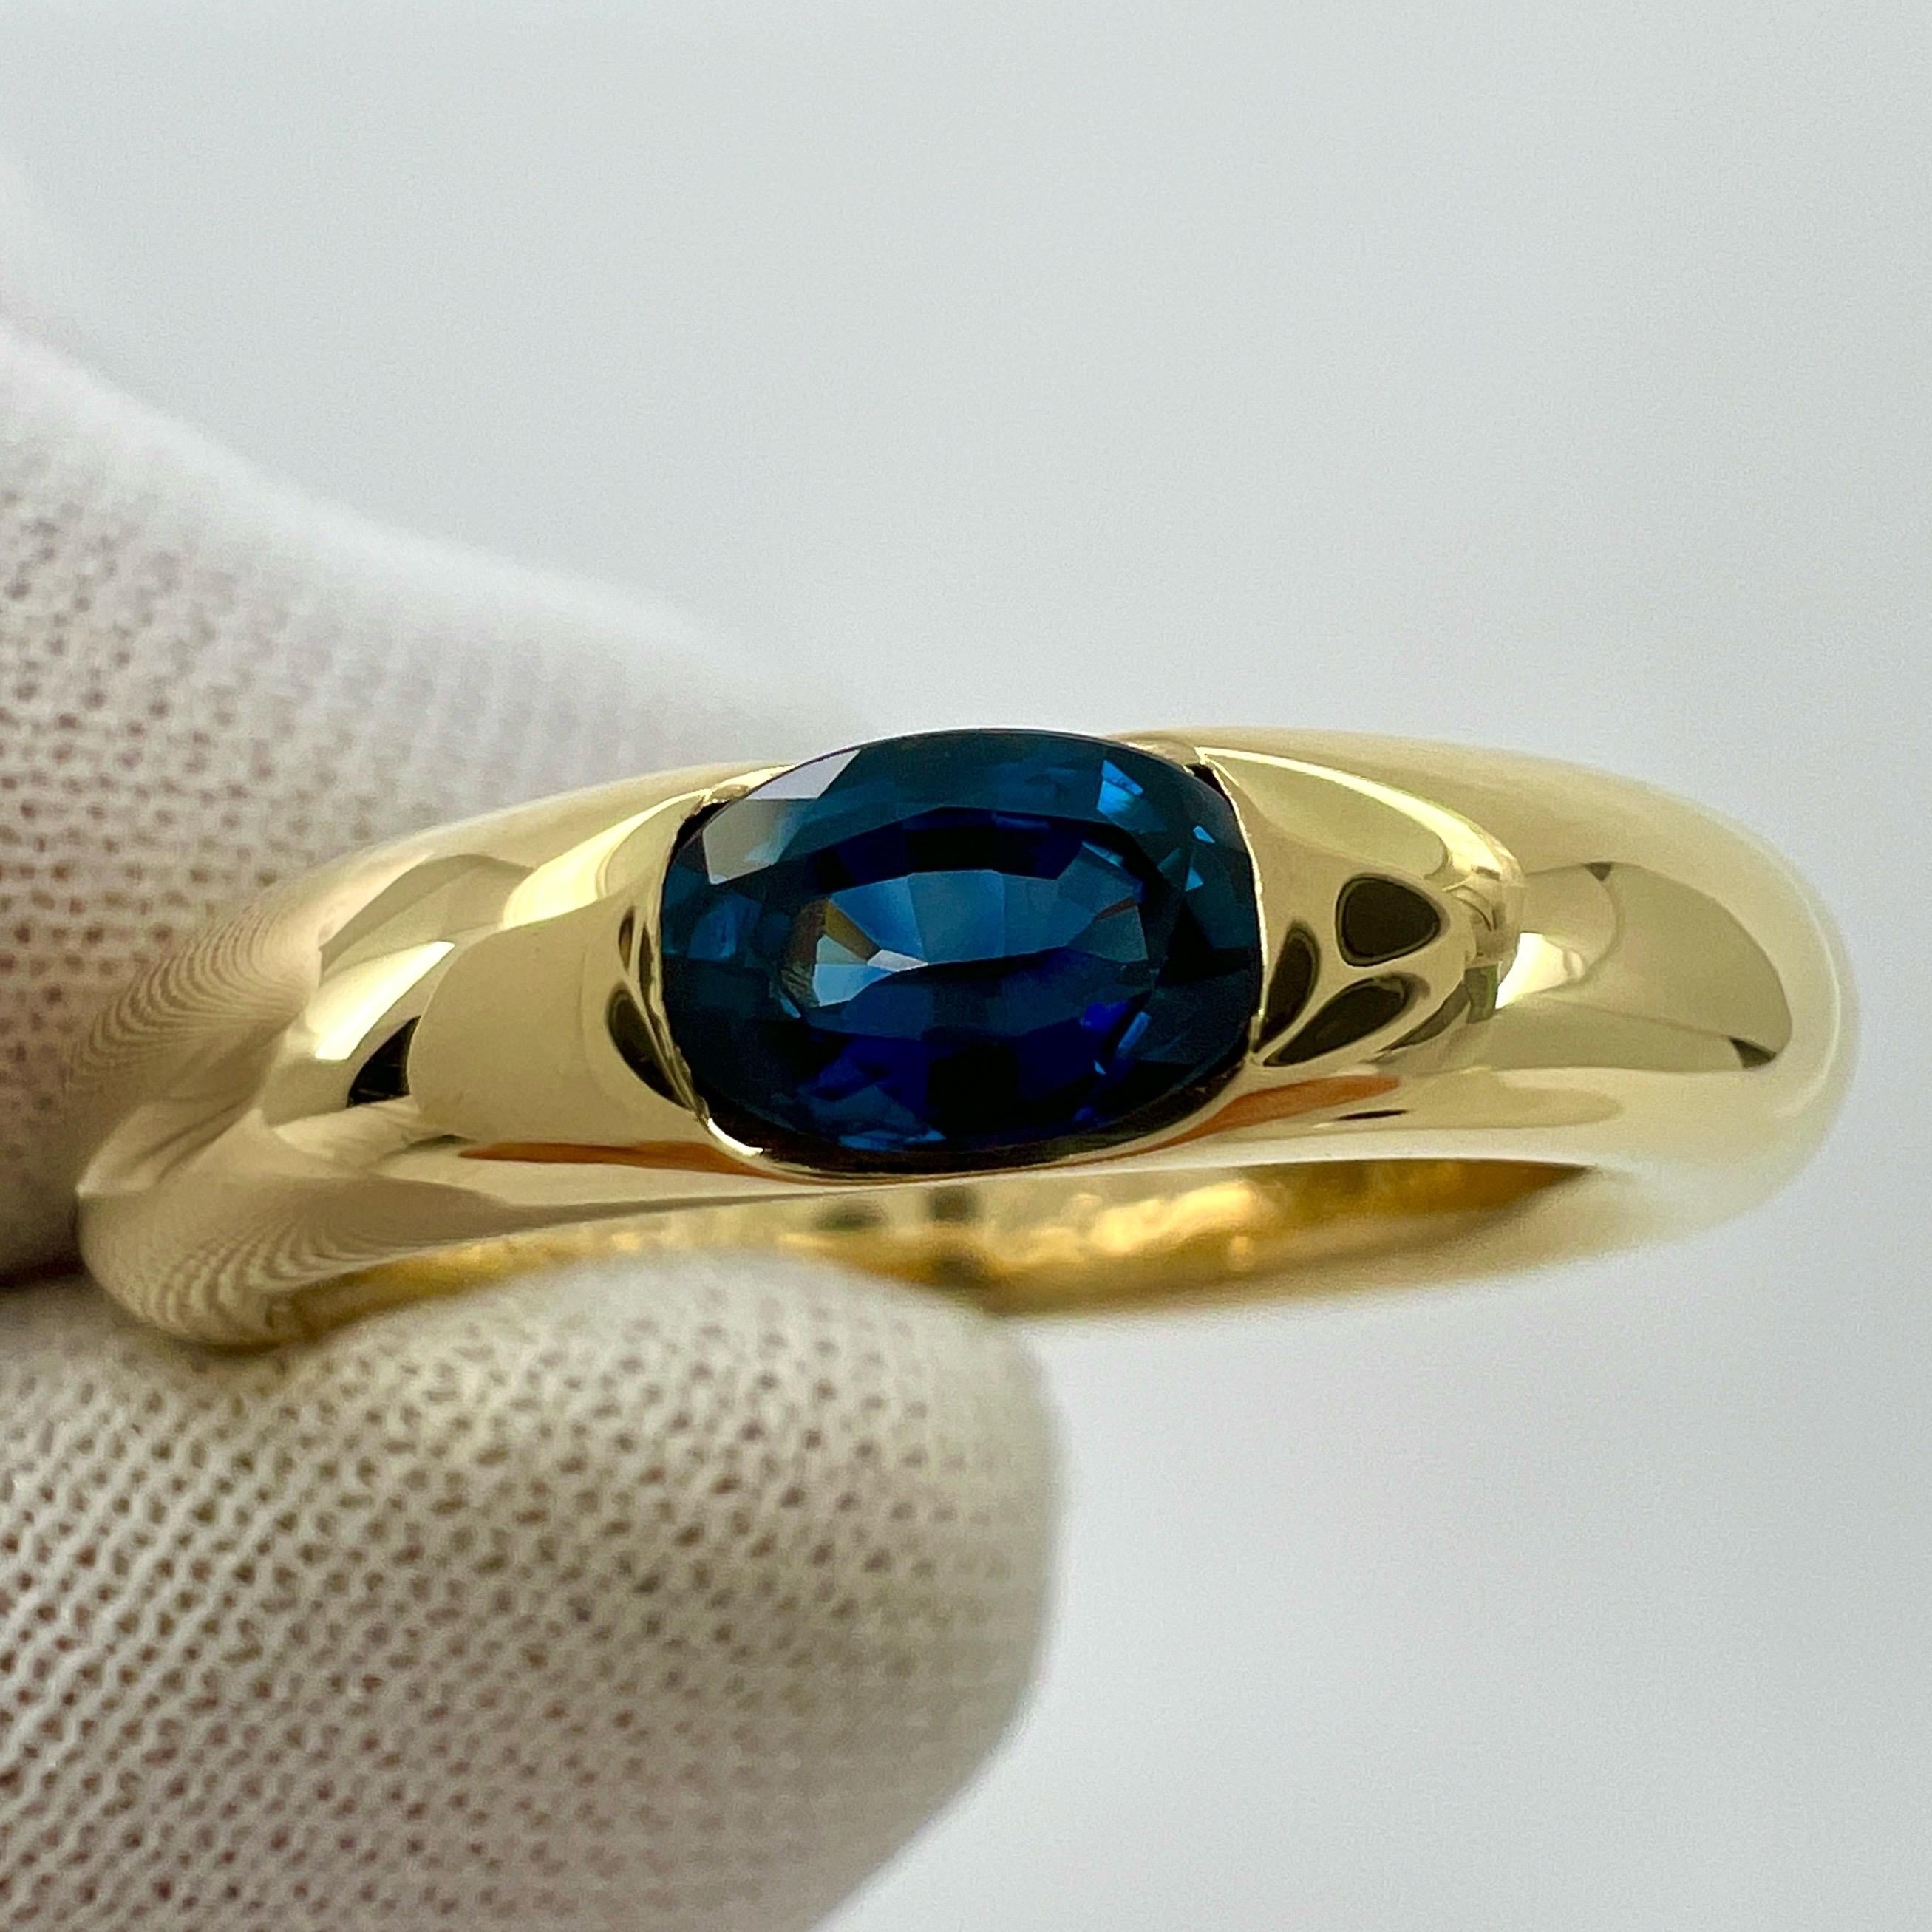 Vintage Cartier Blue Sapphire Oval Ellipse 18k Yellow Gold Solitaire Ring US5 49 For Sale 3